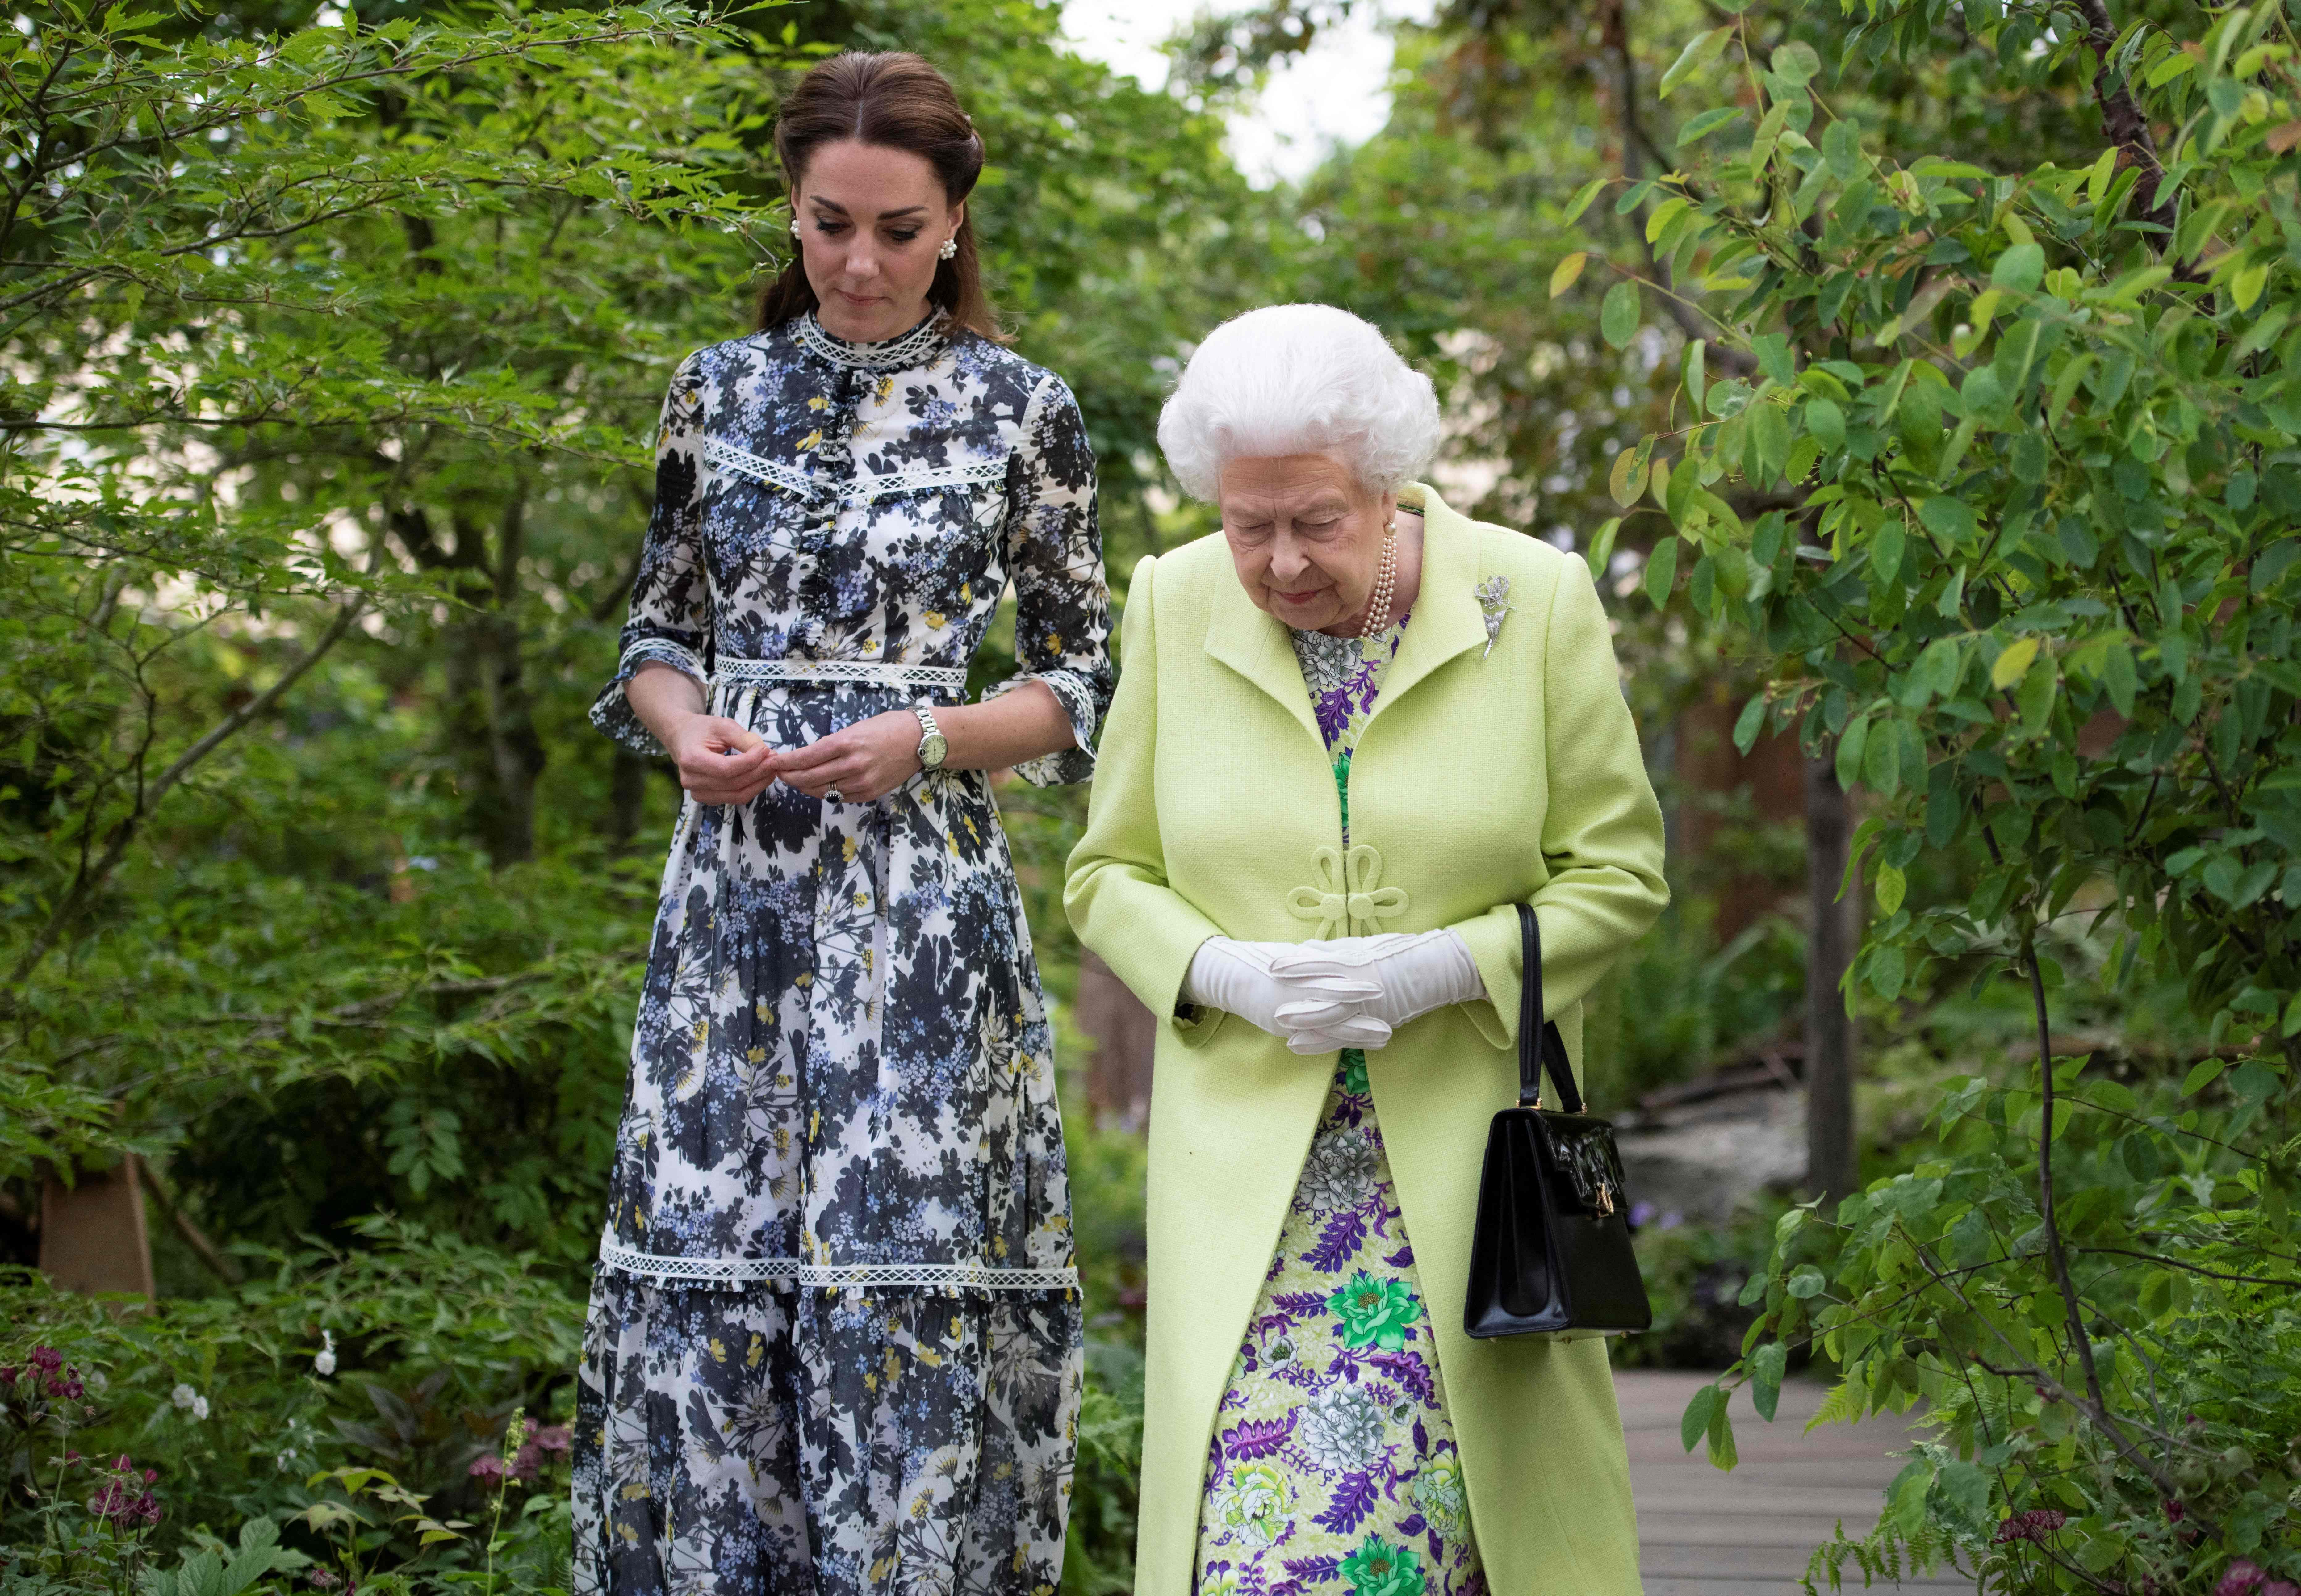 Britain's Catherine, Duchess of Cambridge and Britain's Queen Elizabeth II at the 2019 RHS Chelsea Flower Show in London on May 20, 2019. | Source: Getty Images